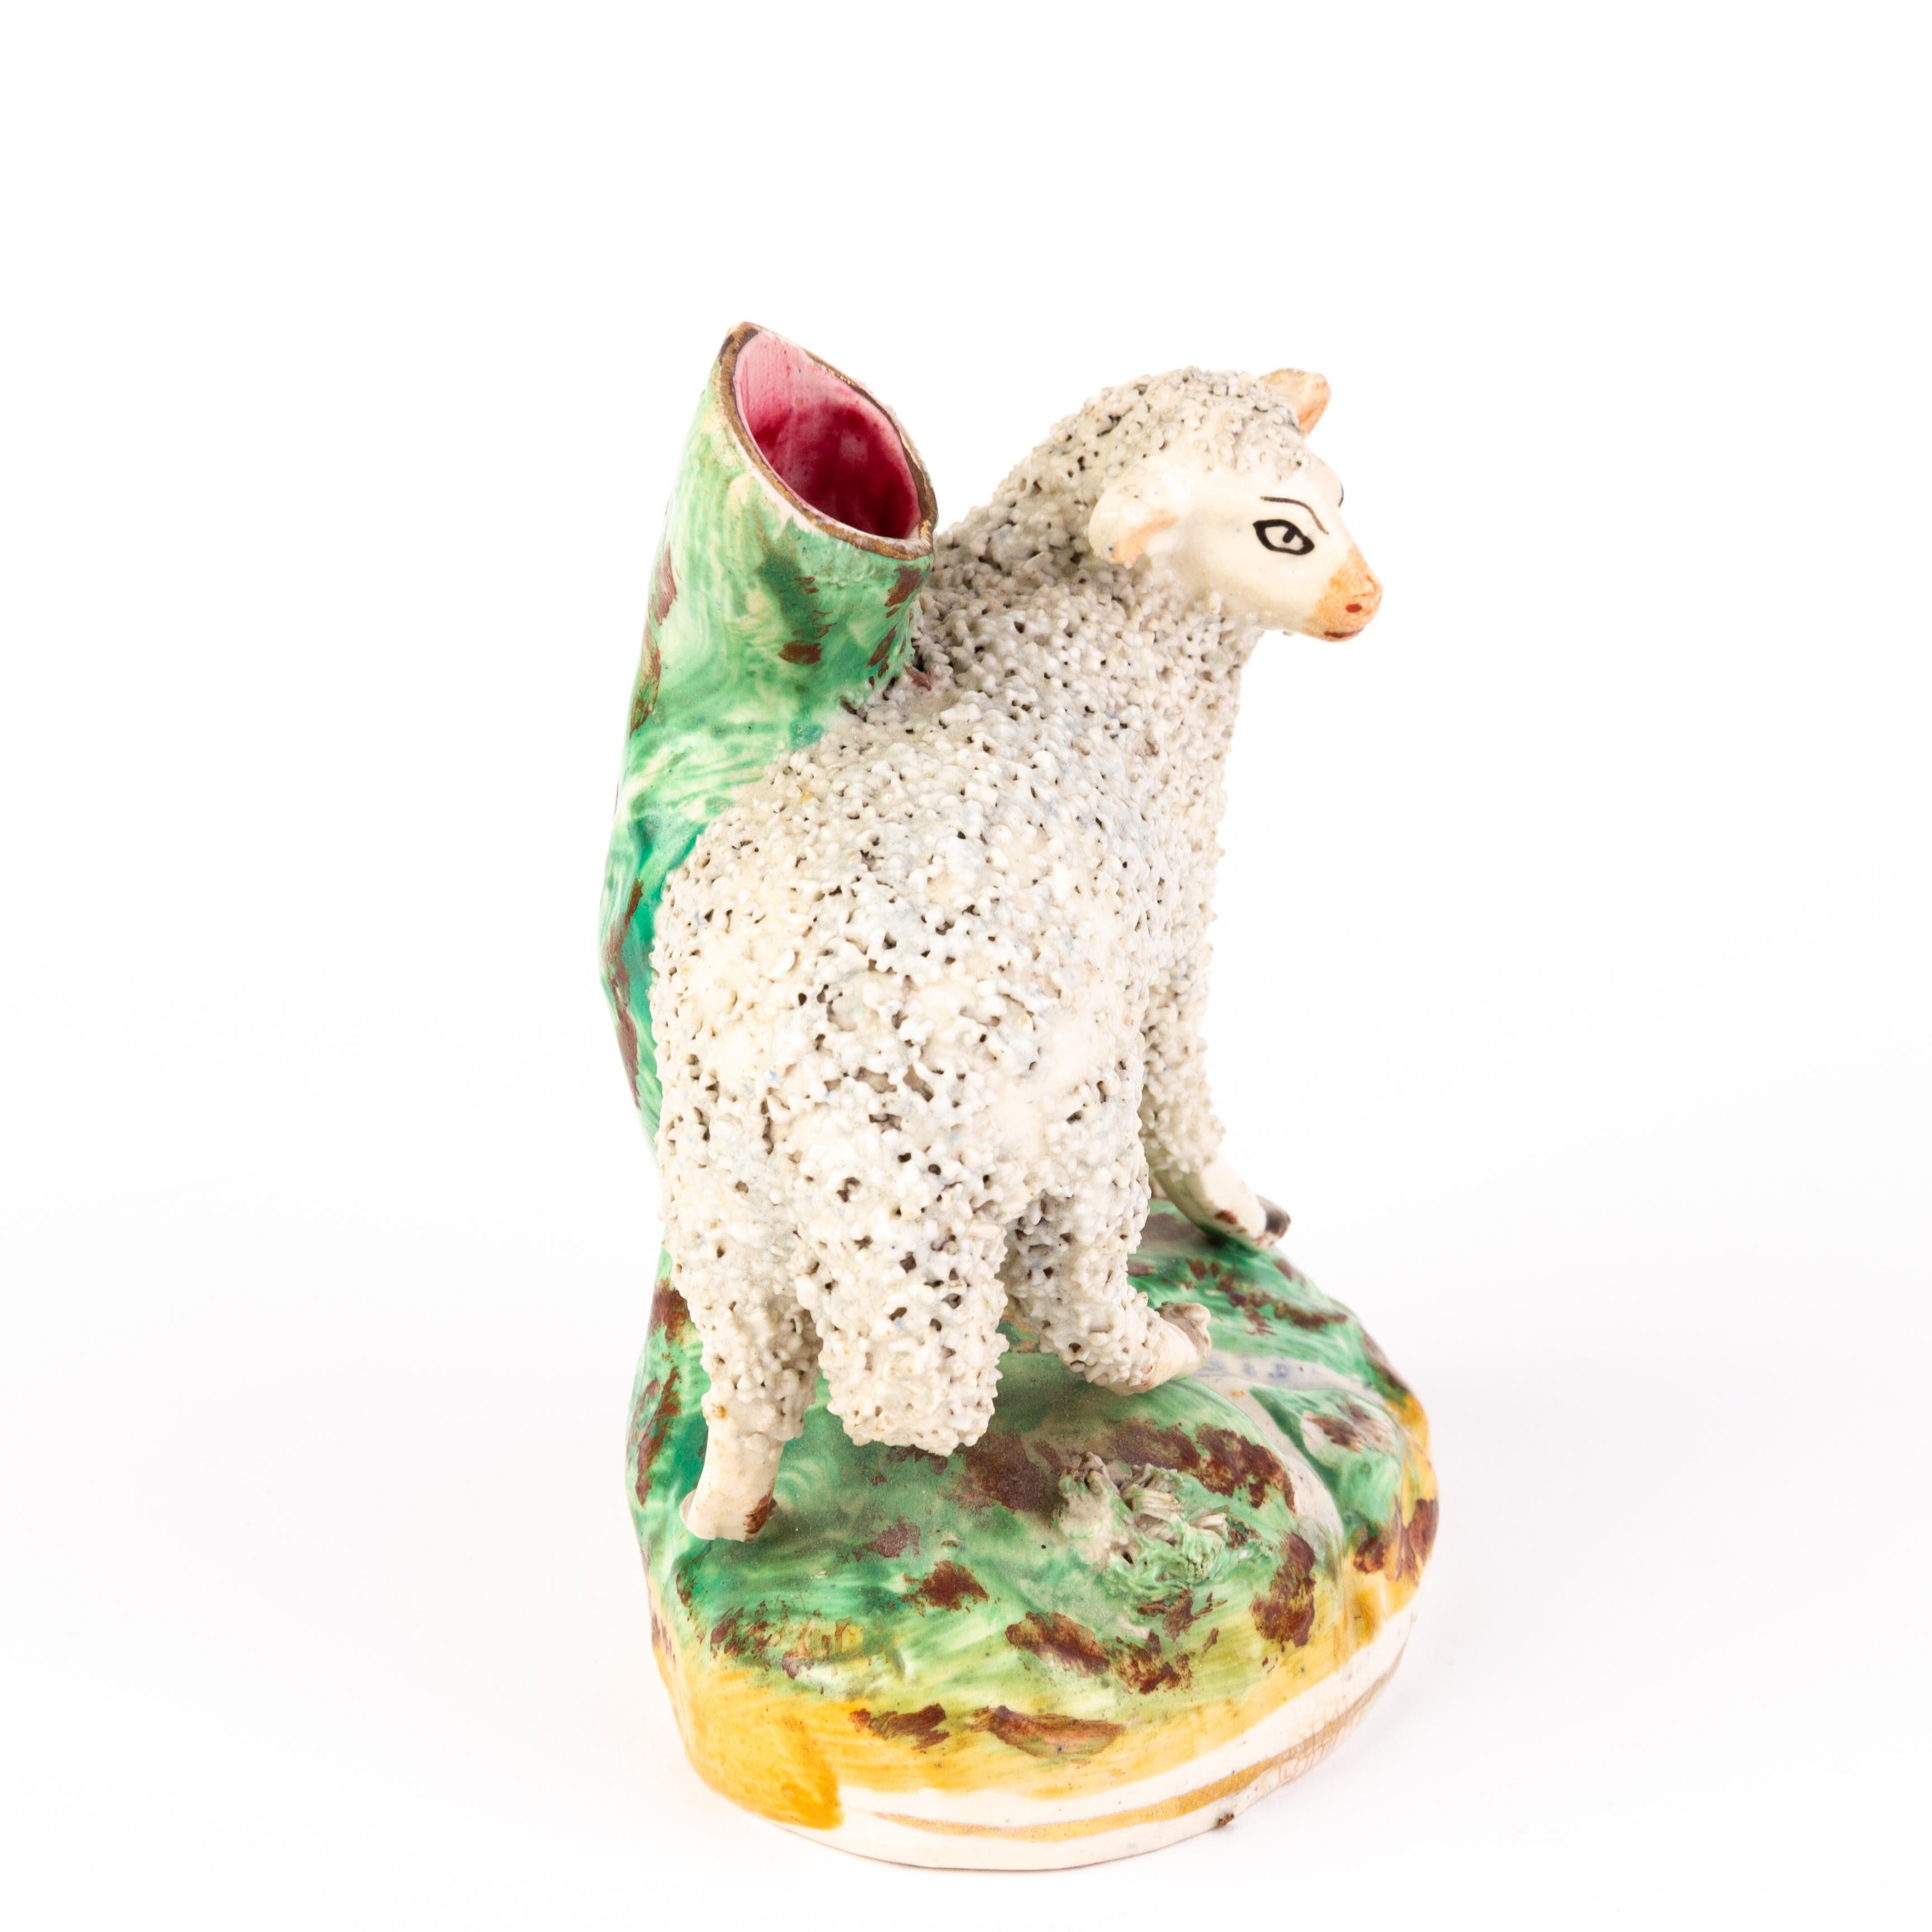 In good condition
From a private collection
Free international shipping
Staffordshire Pottery Sheep Spill Vase 19th Century 